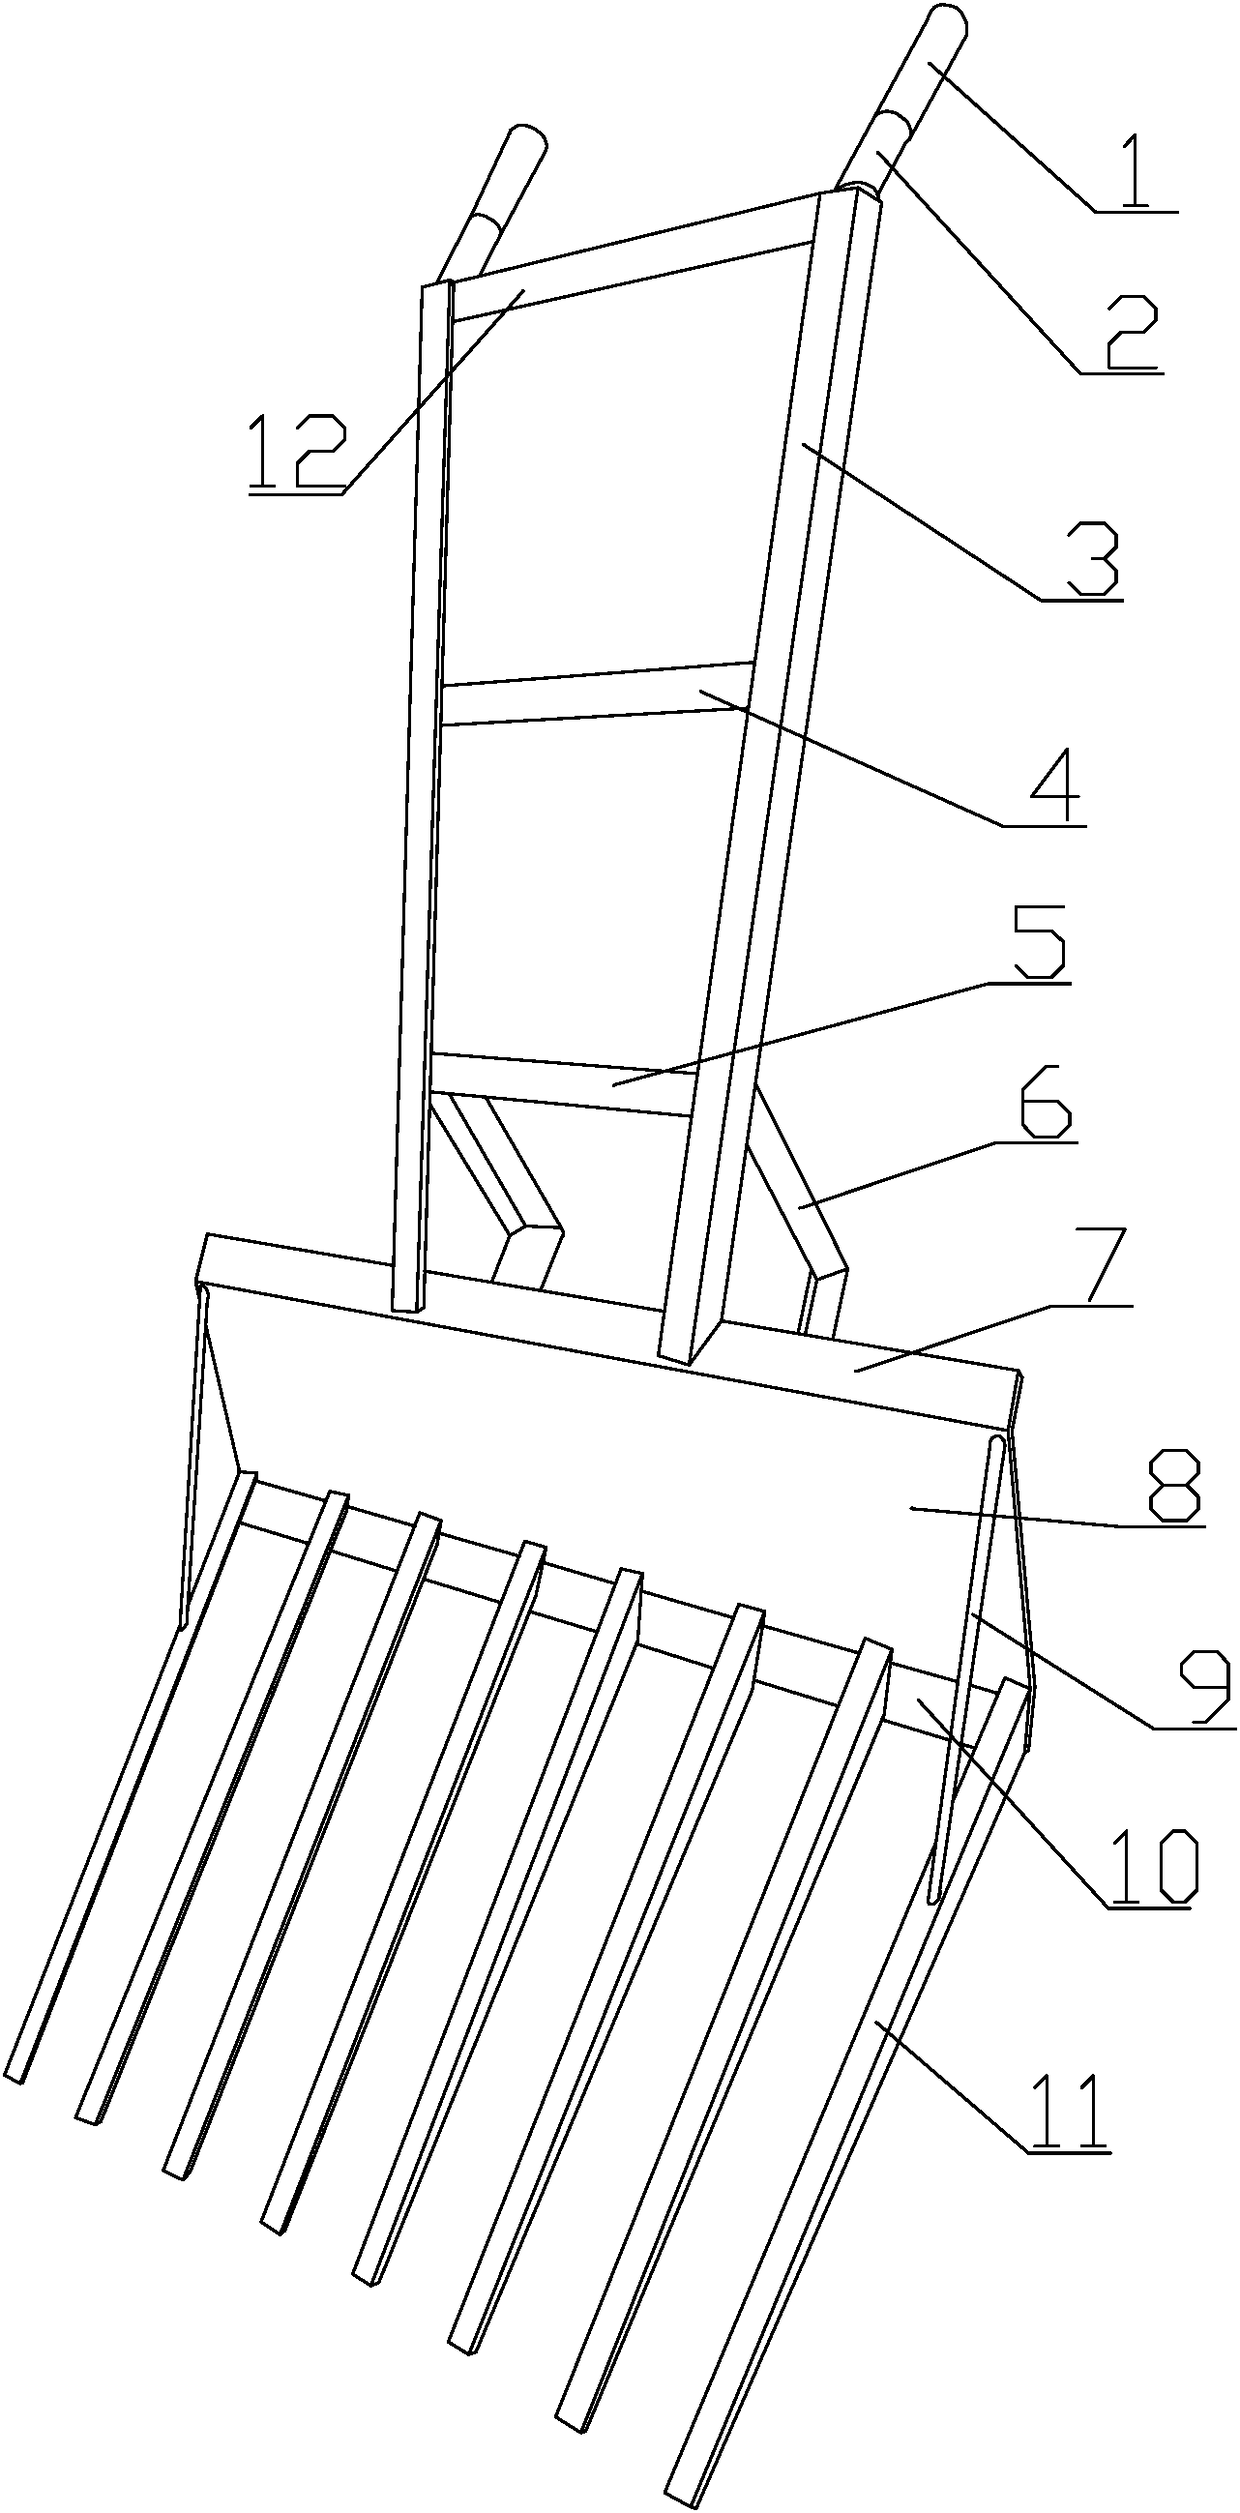 Tool for spreading for cooling of large-scale tea leaves